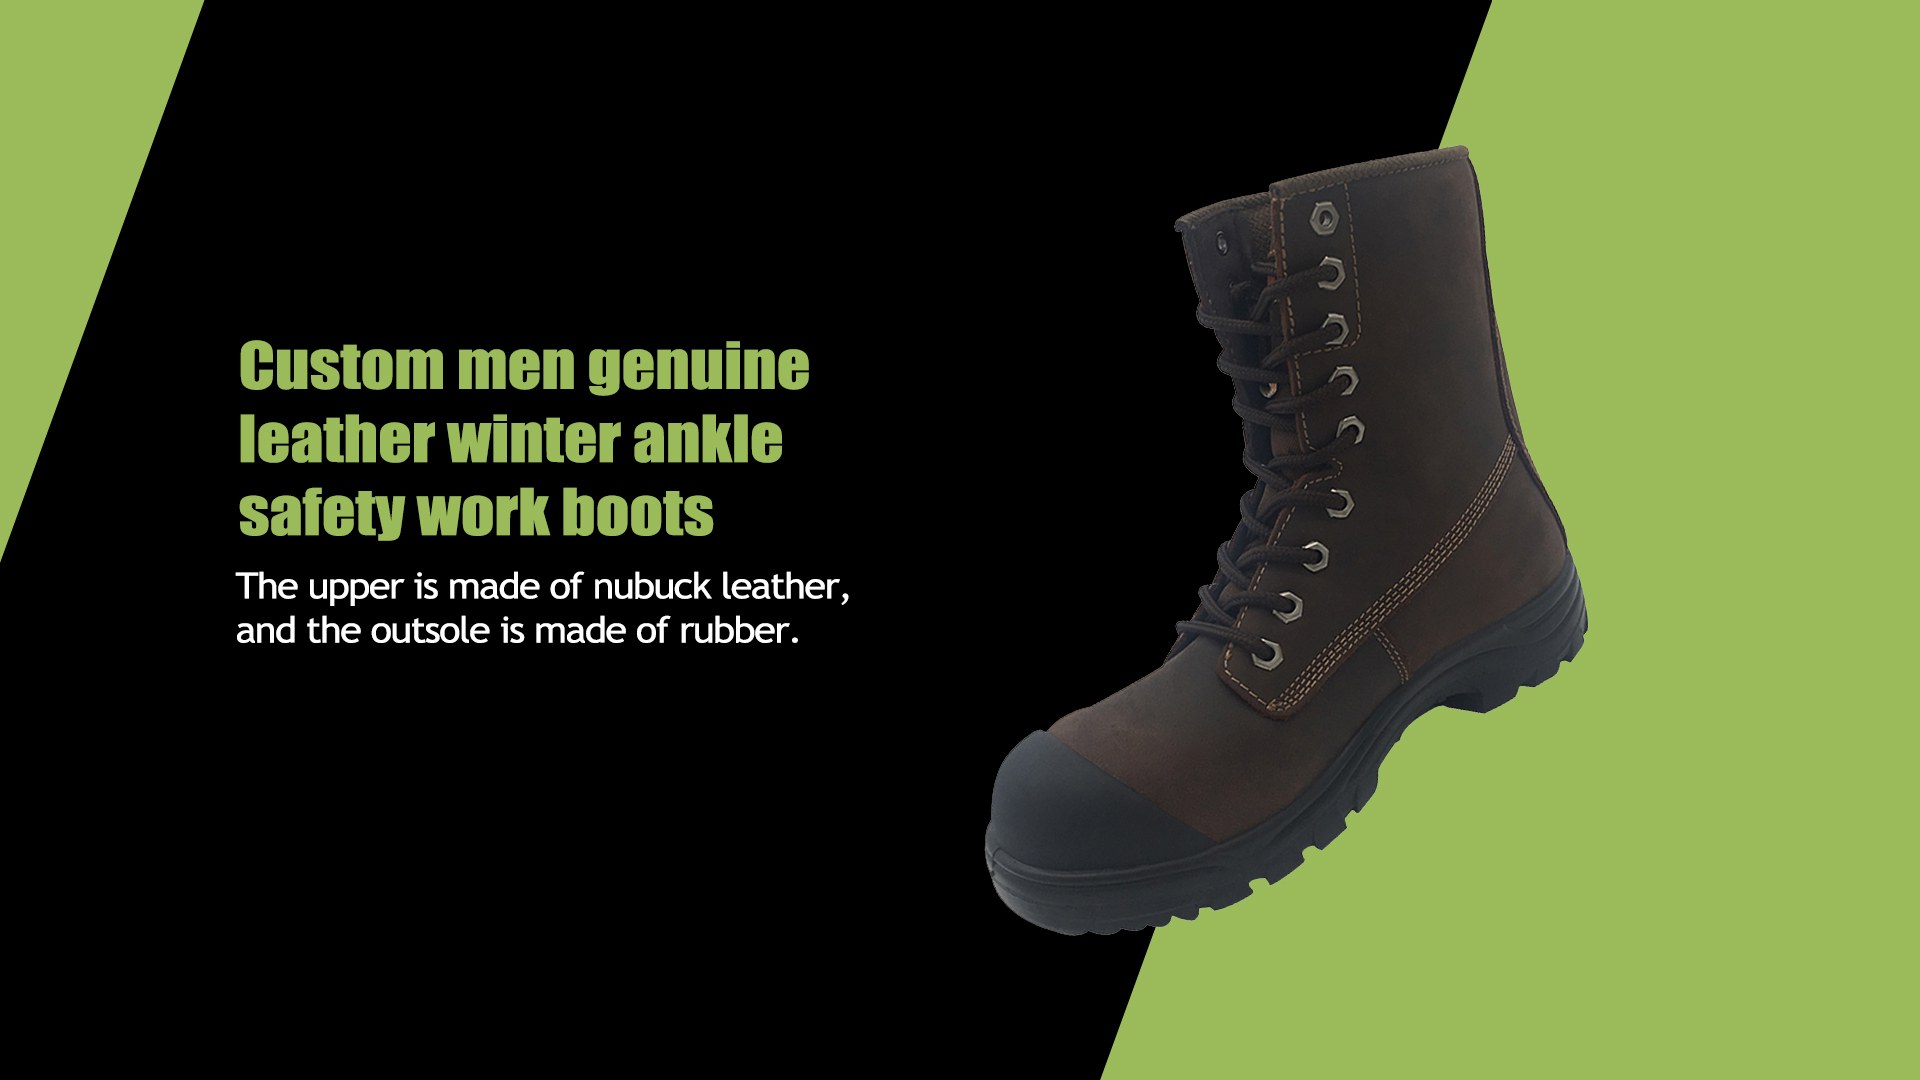 Custom men genuine leather winter ankle safety work boots